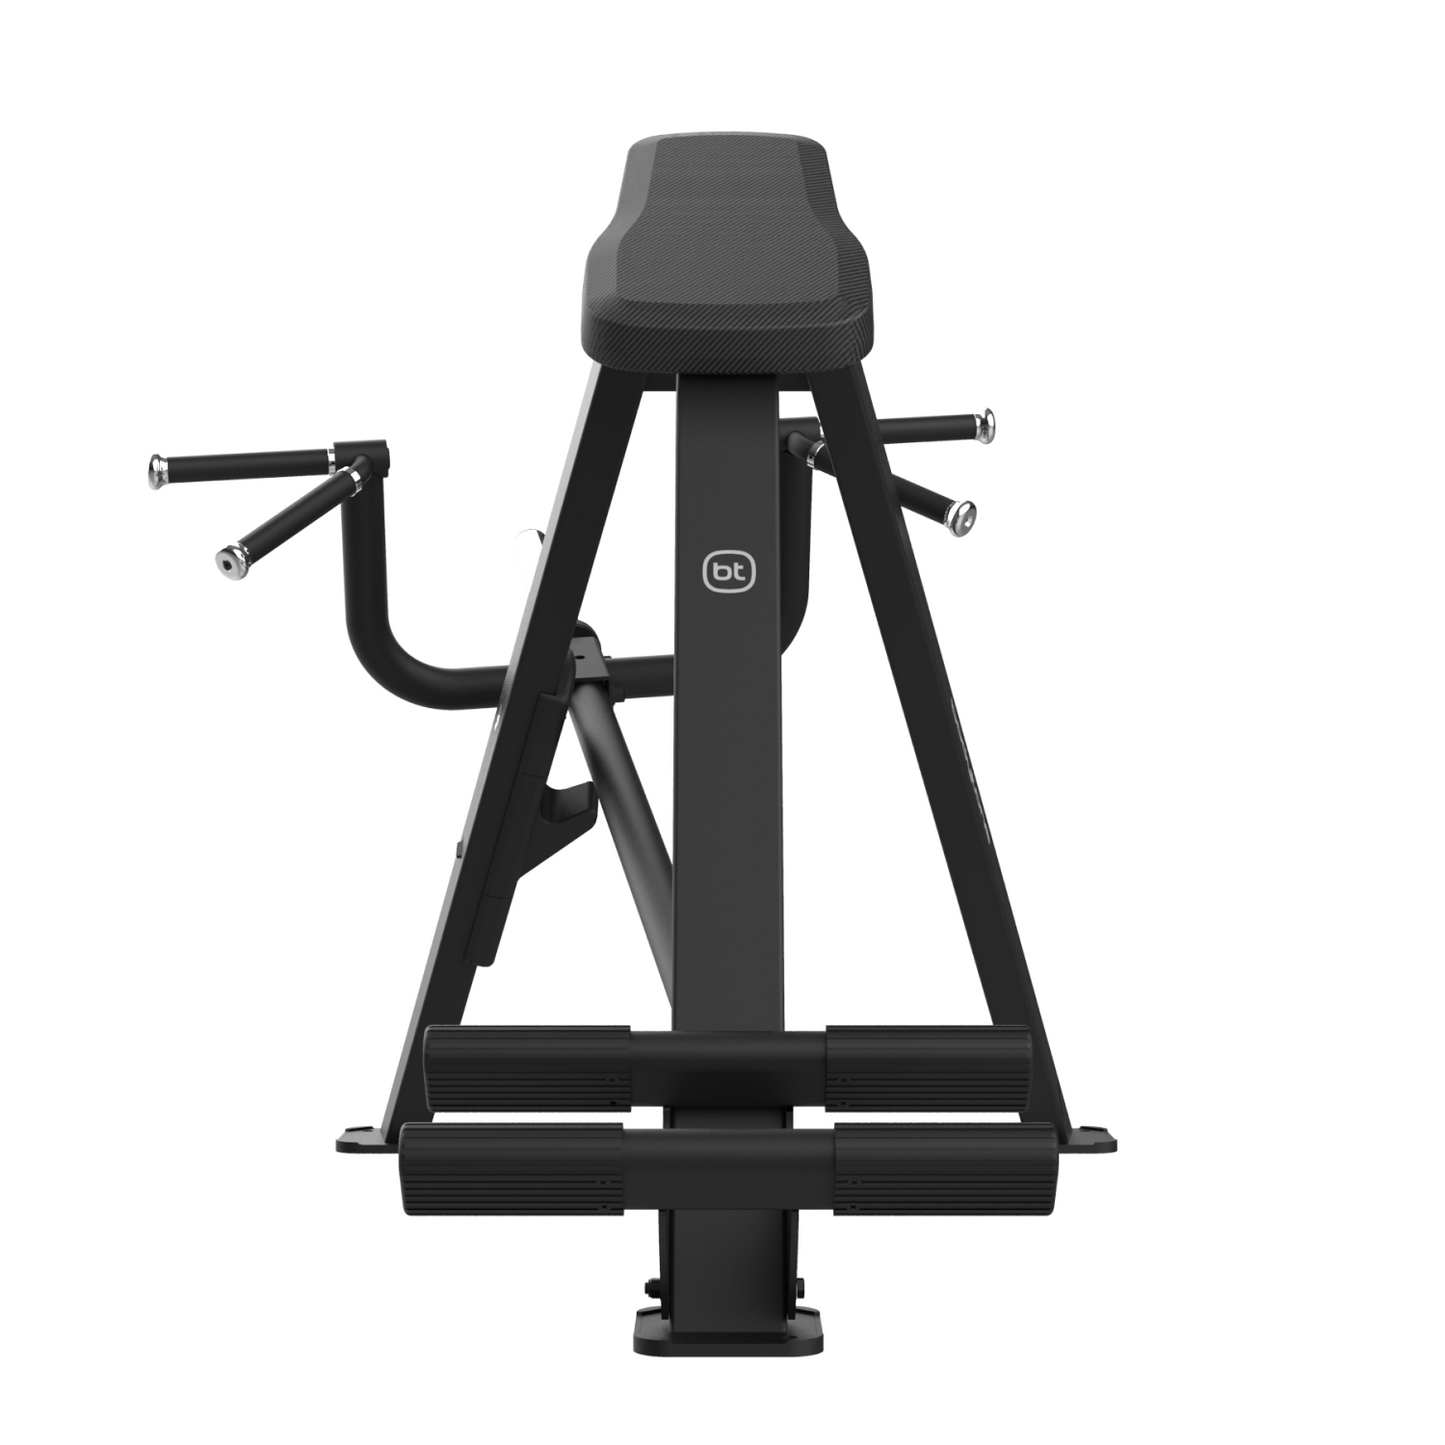 T-shaped rowing bench